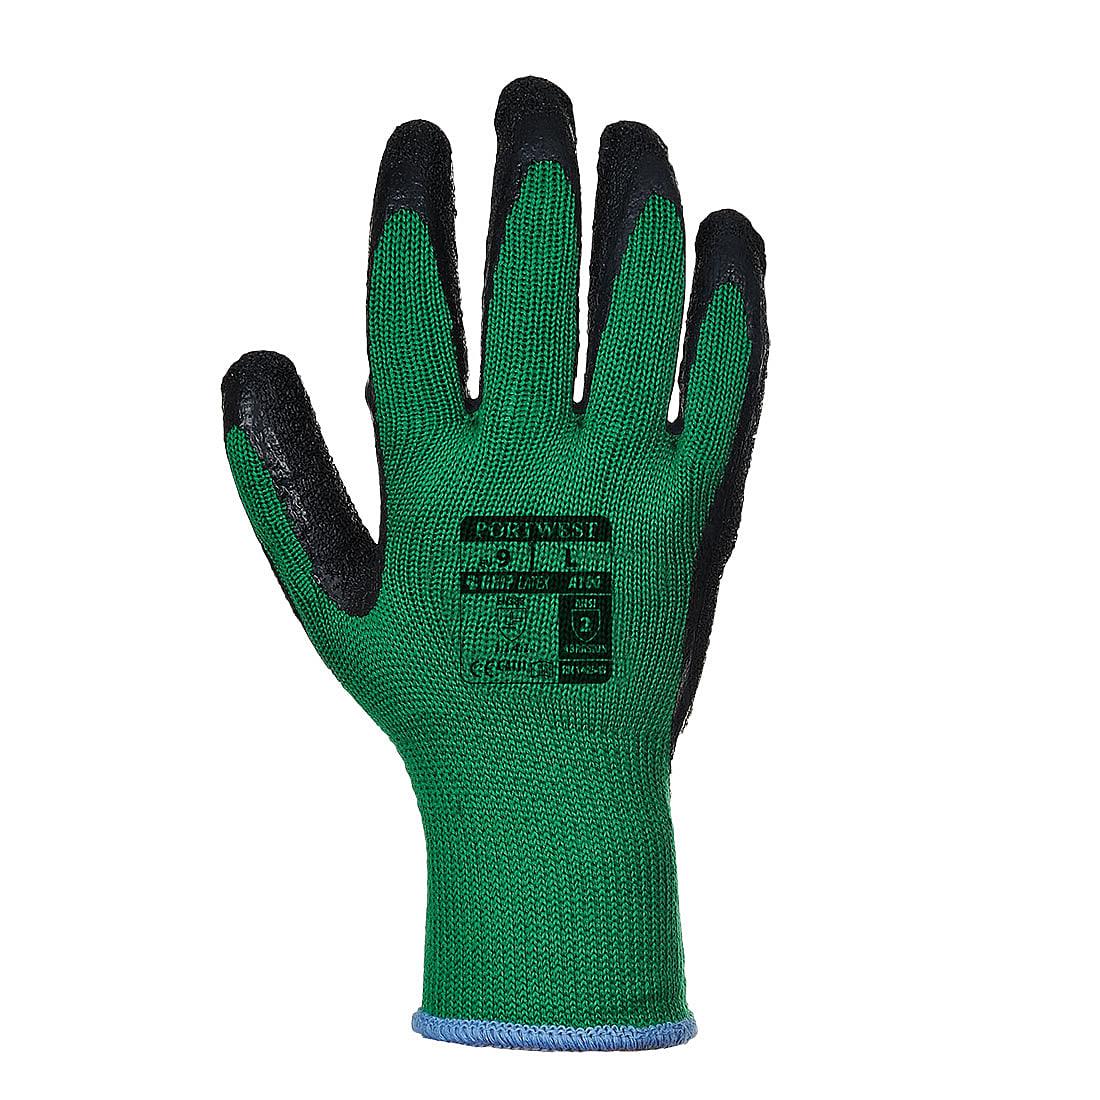 Portwest Grip Gloves - Latex in Green / Black (Product Code: A100)